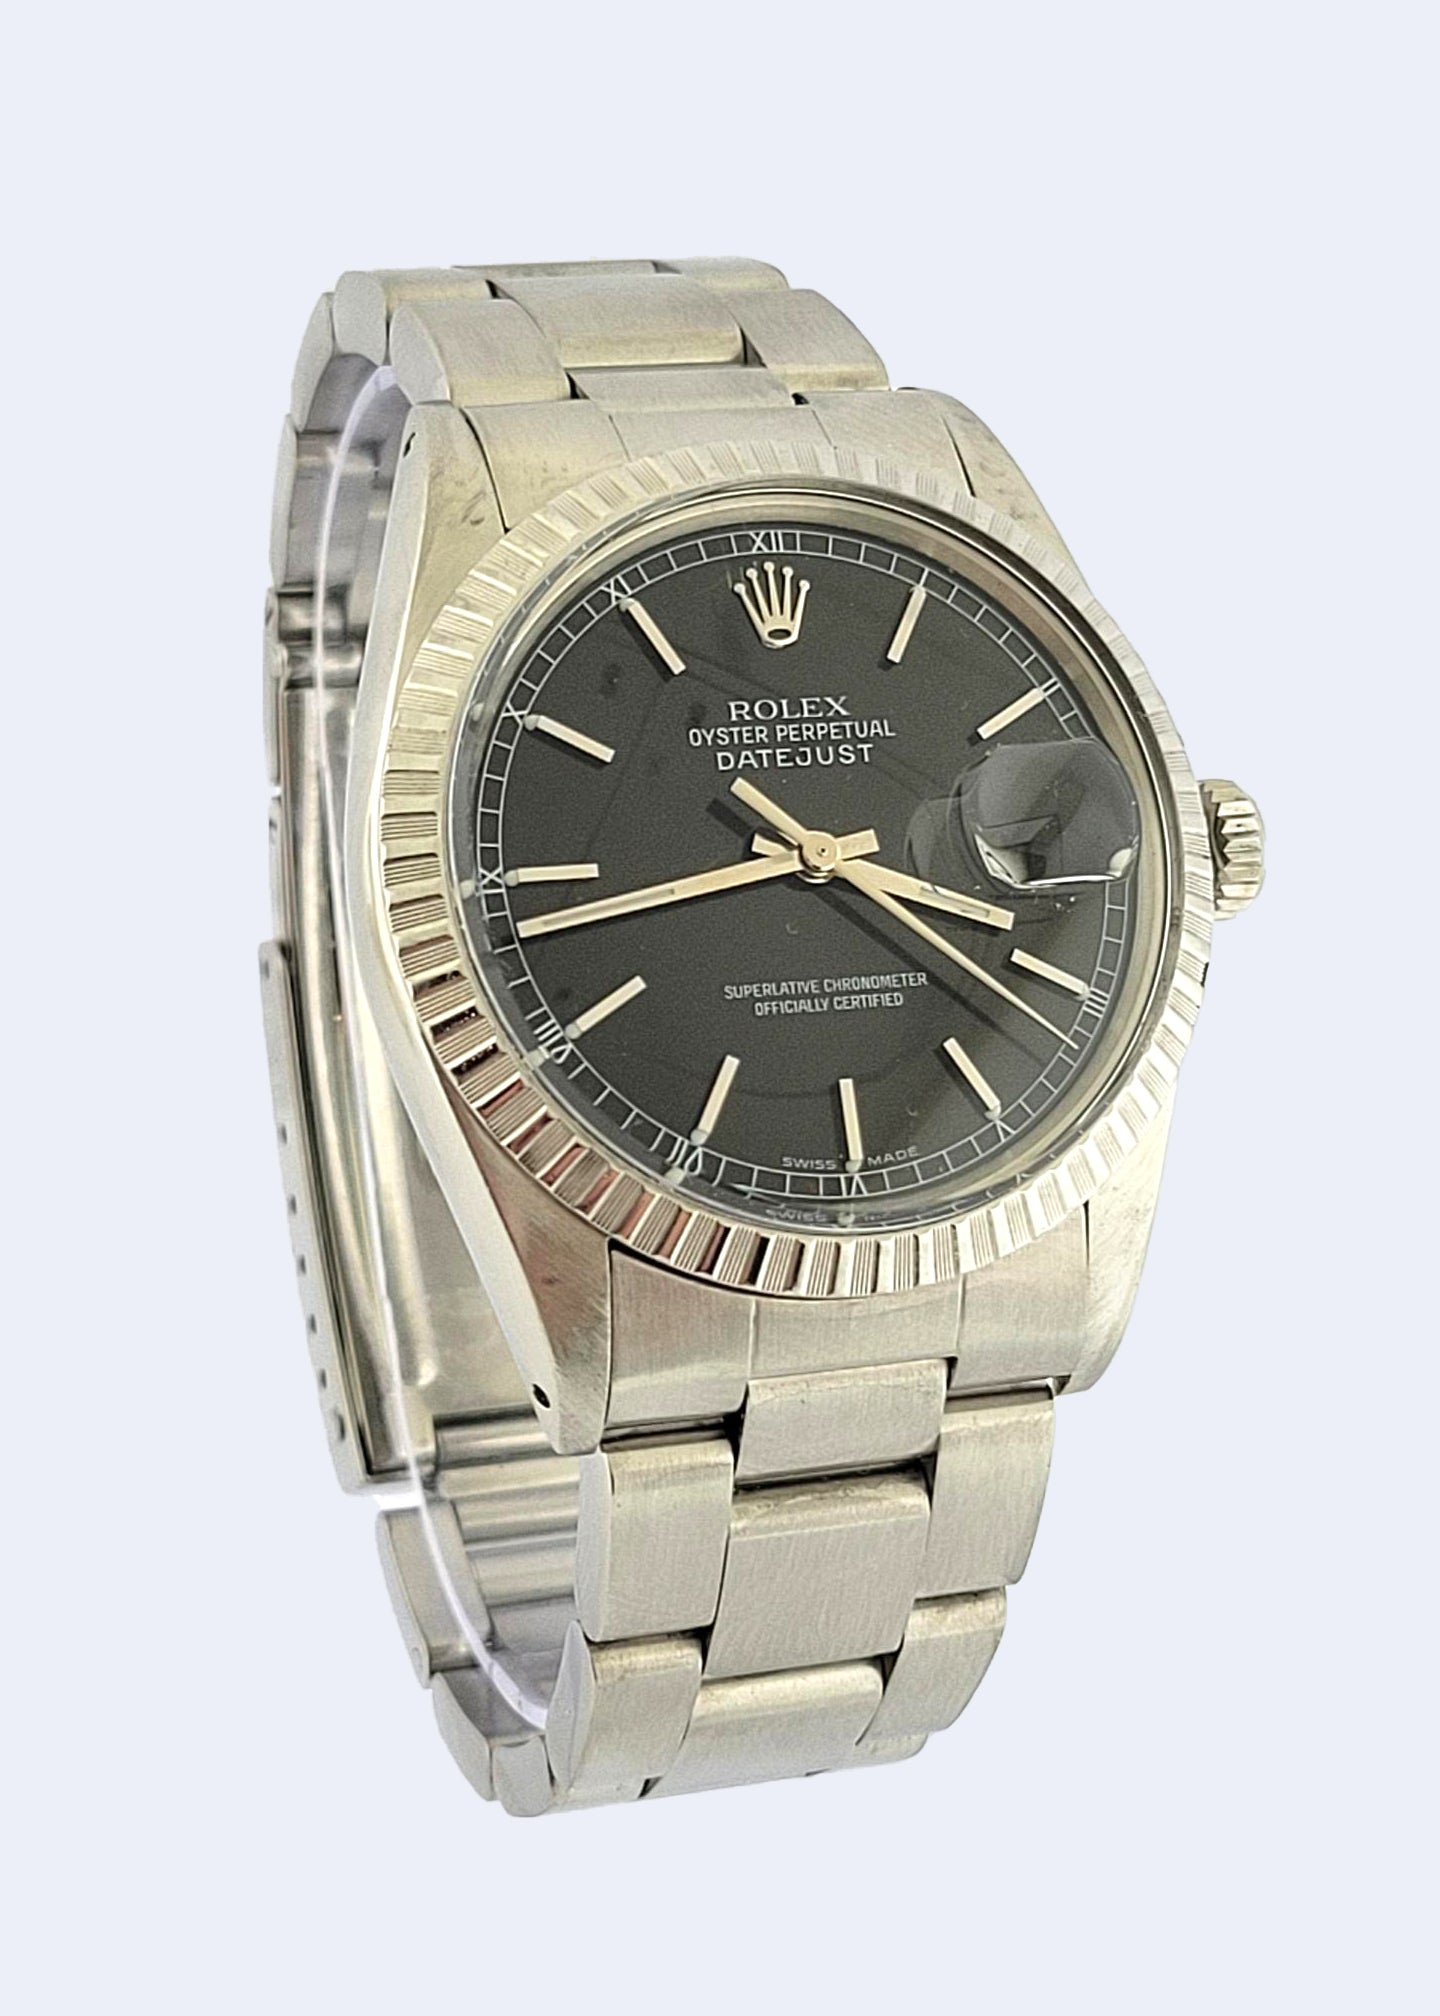 S/S Rolex Datejust Reference 16030 with Engine Turn Bezel